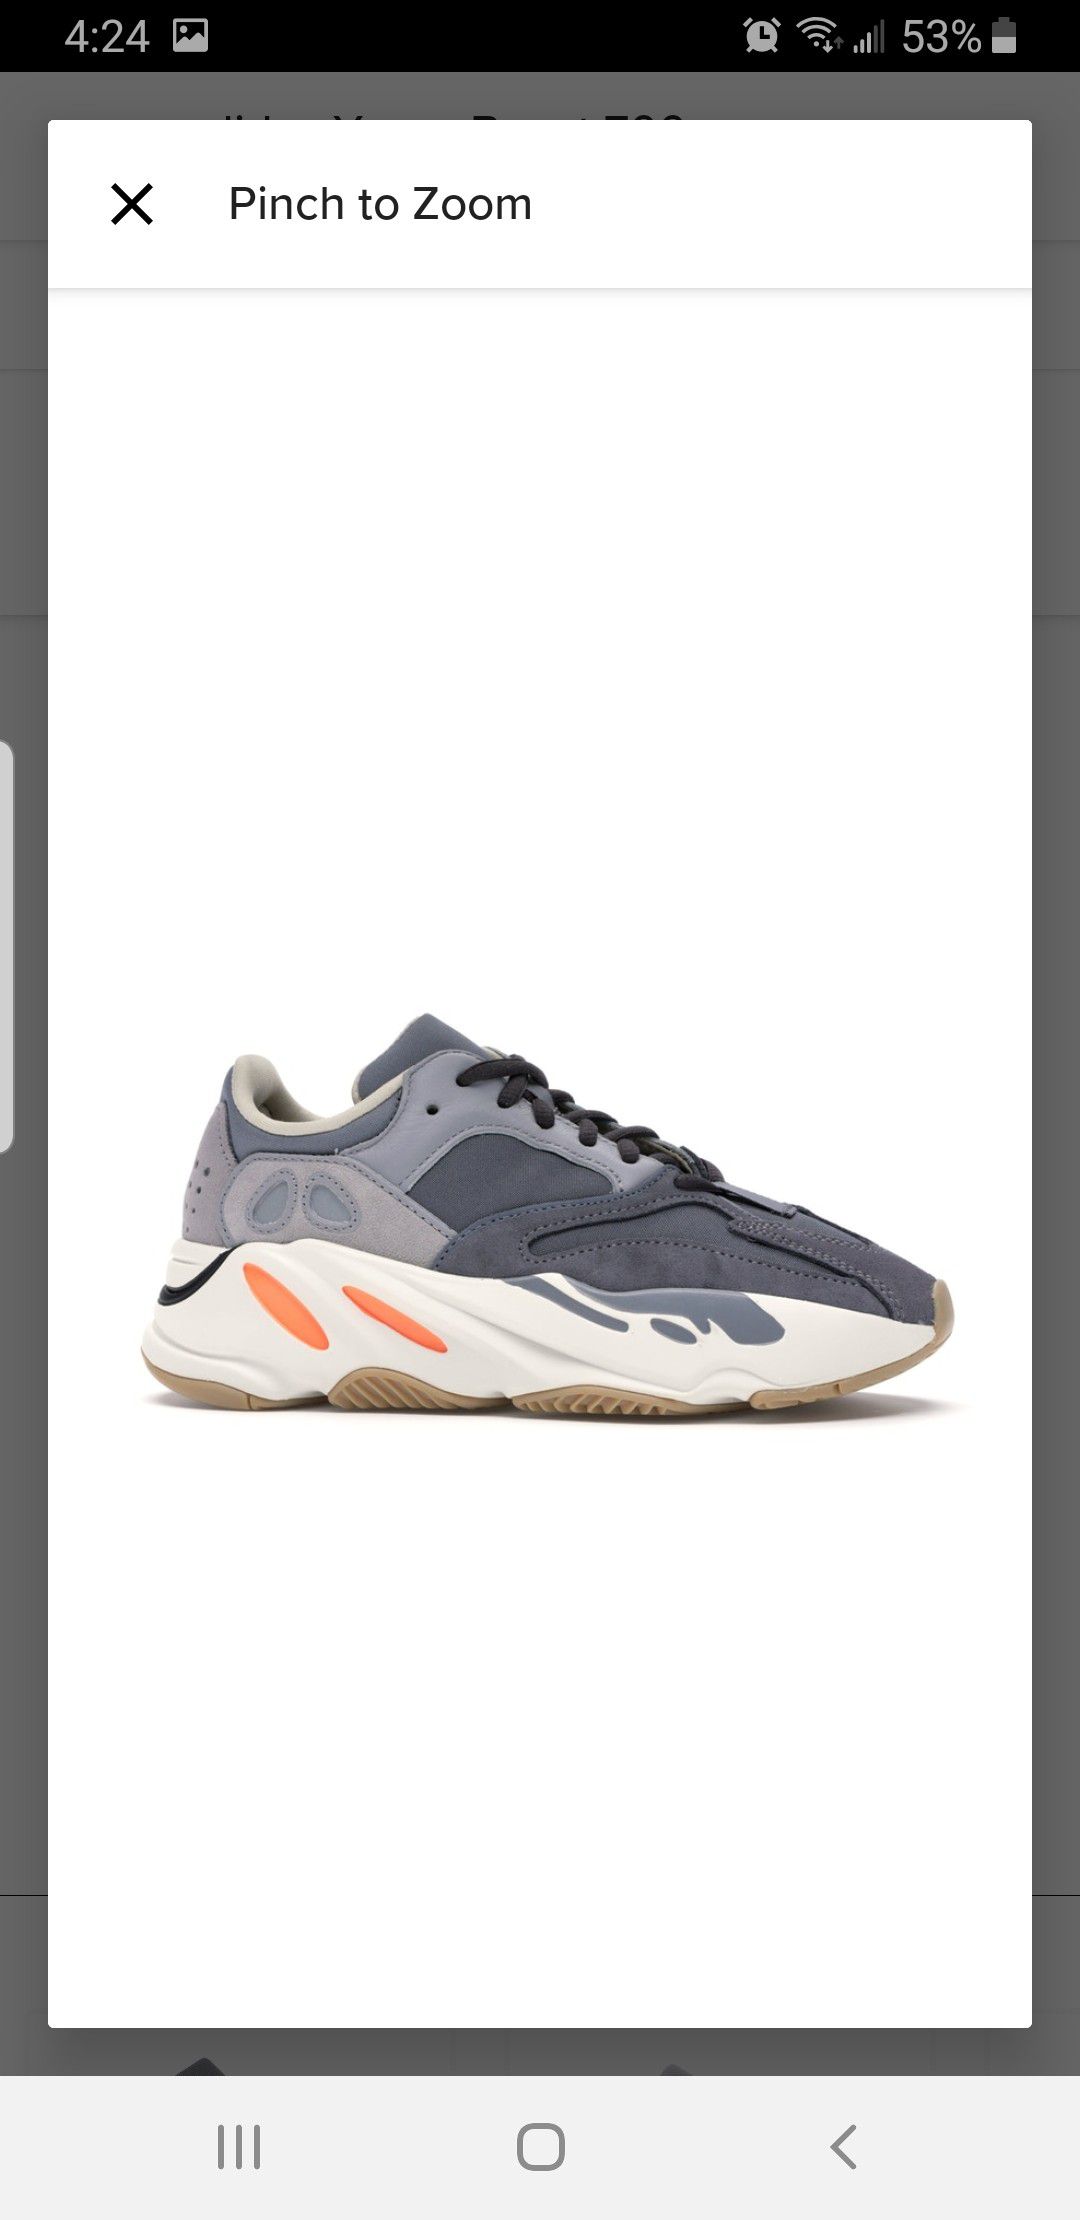 Yeezy 700 "Magnent" Size 12 DS brand new